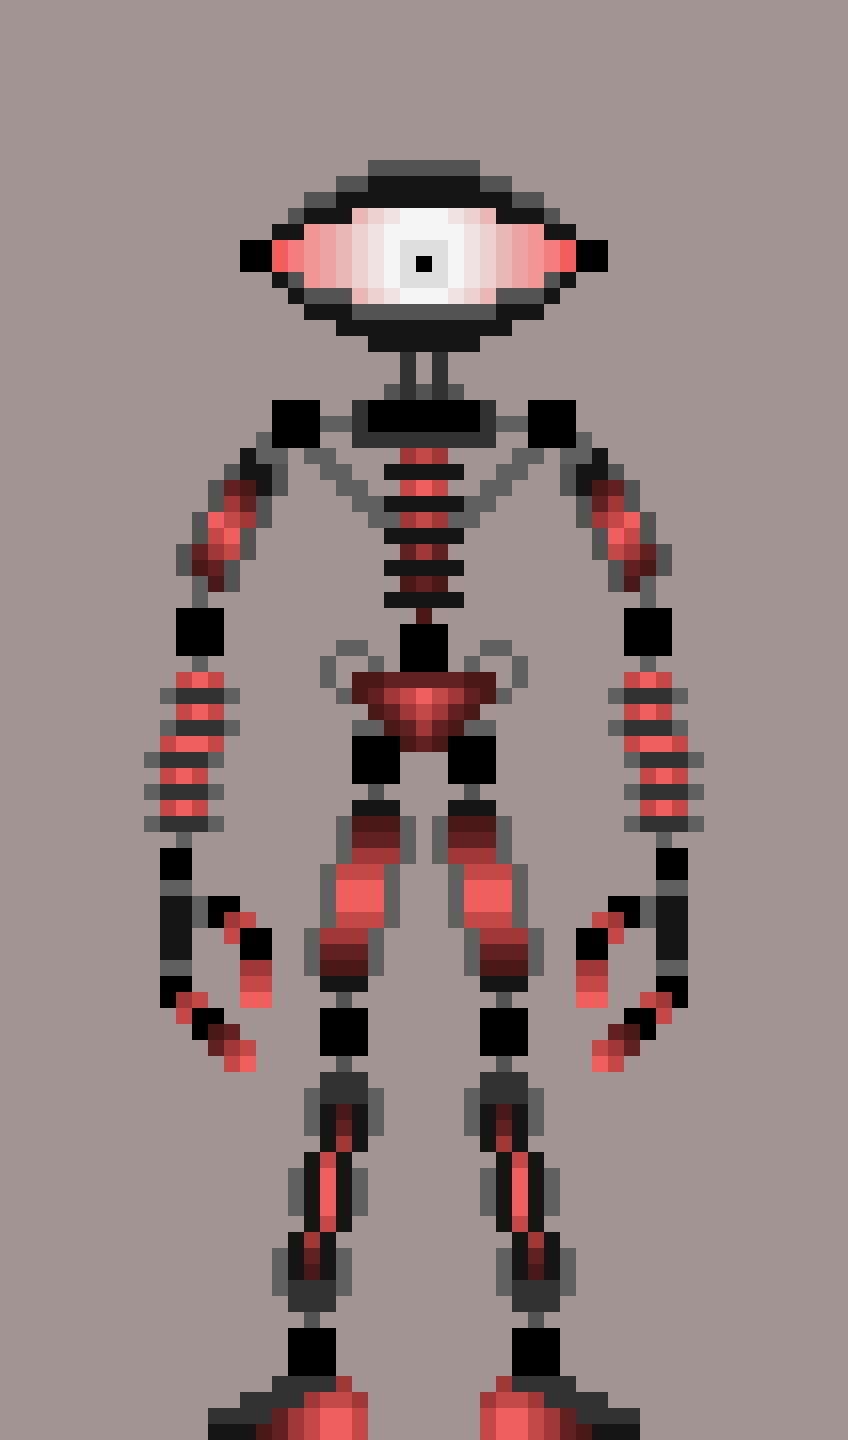 Hunger as an Animatronic (Requested by @project_eyes_) 